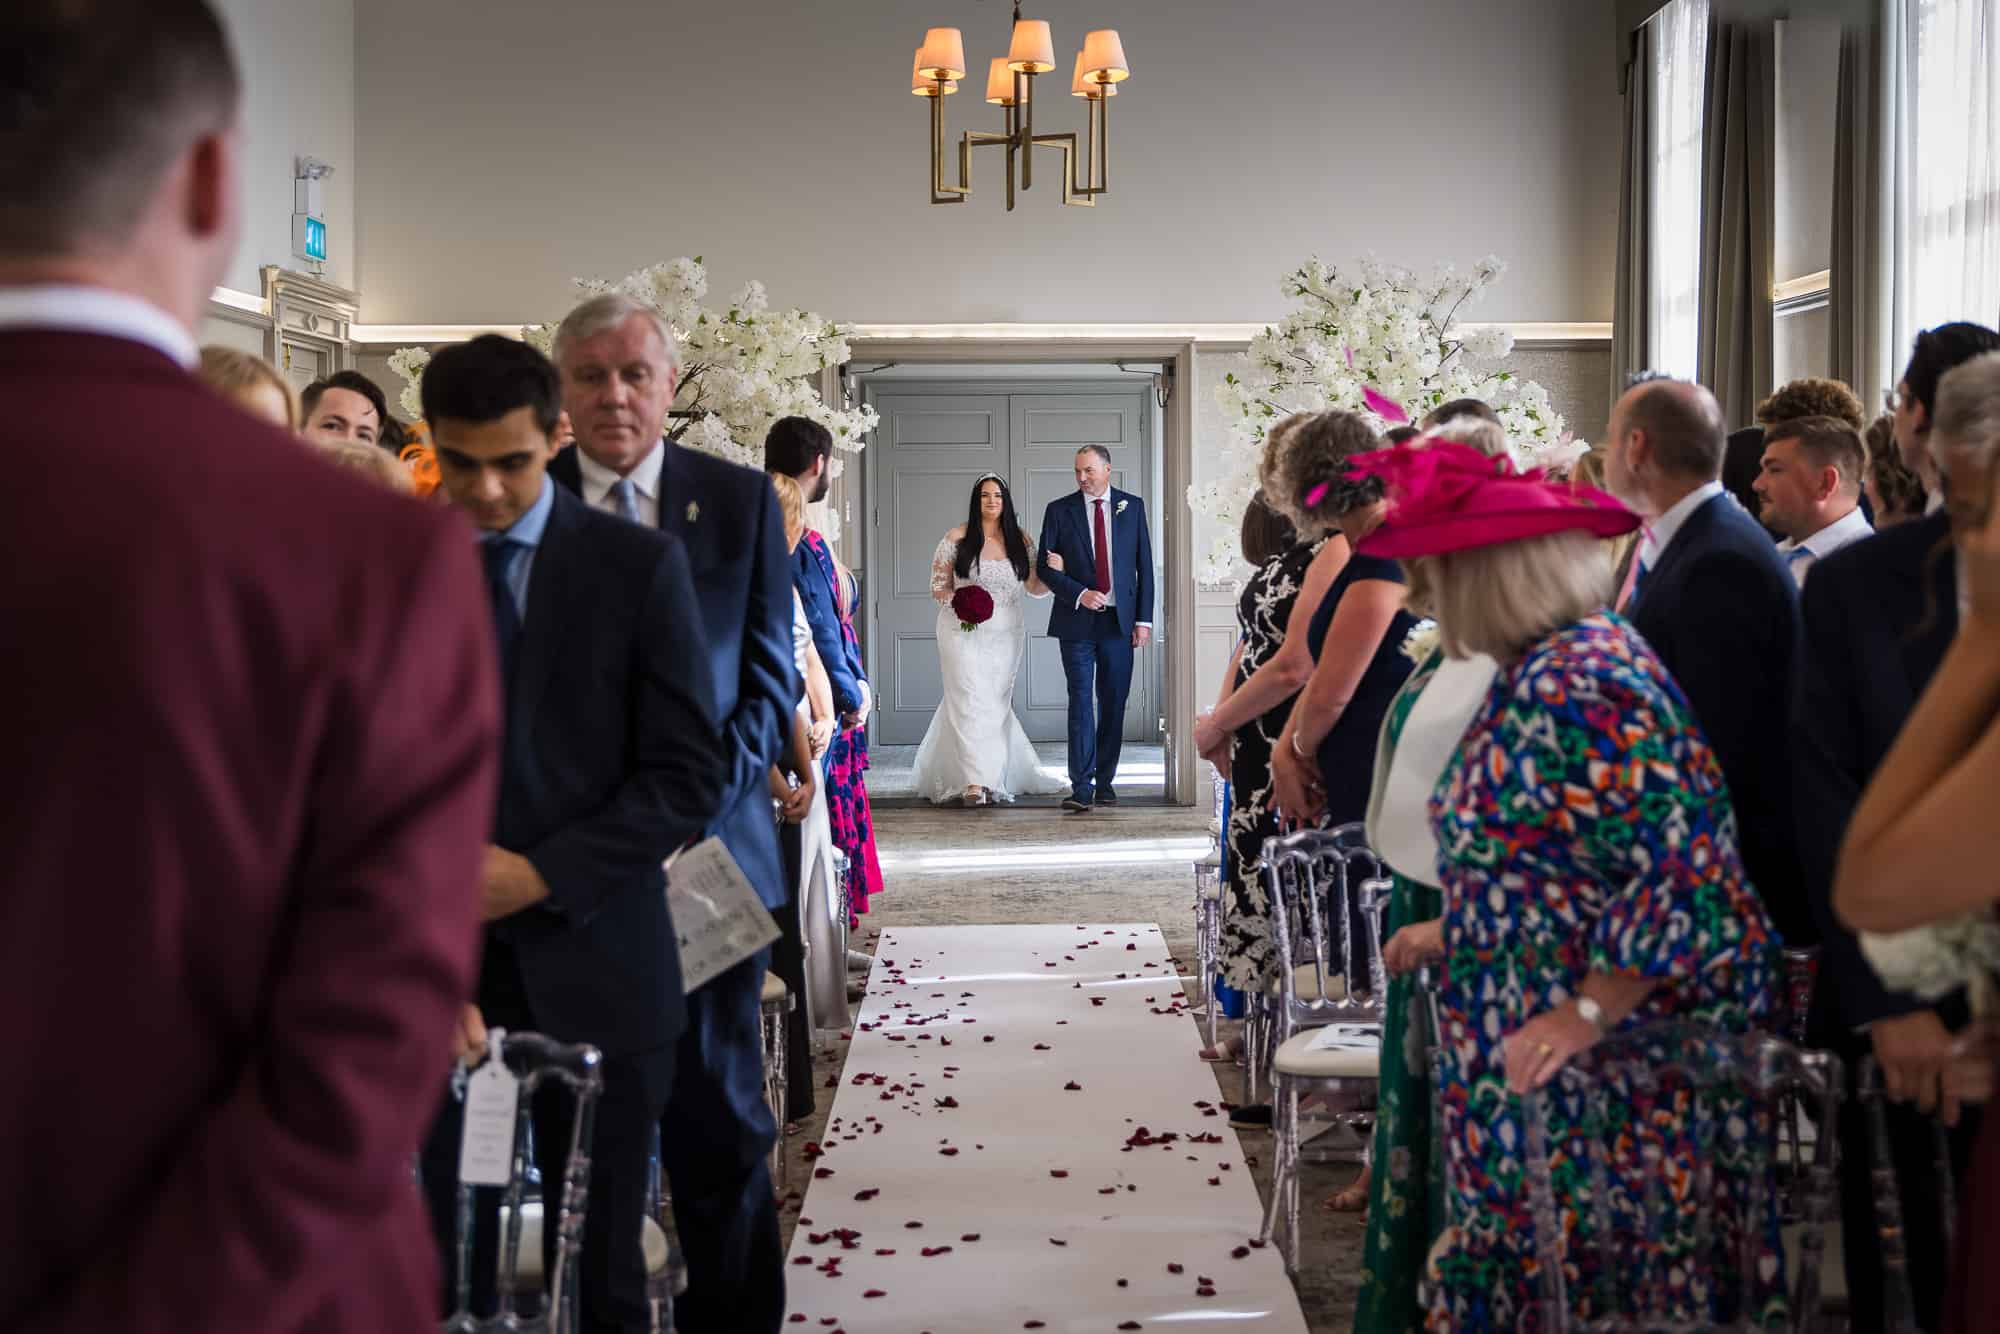 The groom first sets his eye's on his bride as she walks down the aisle at the De Vere Beaumont Estate in Windsor. 